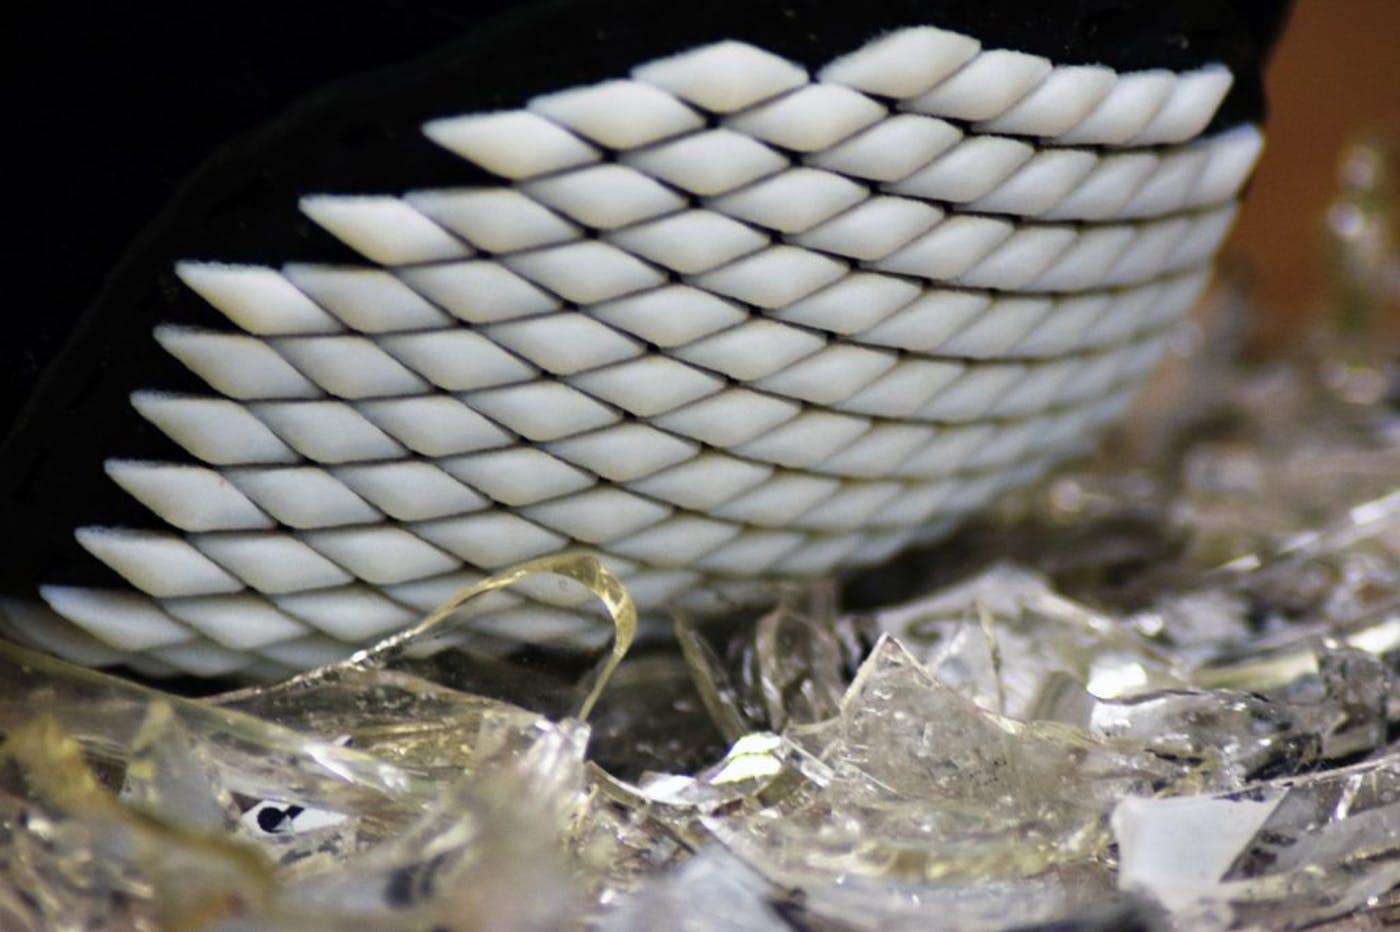 The 3D printed flexible armour inspired by the chiton mollusc on broken glass. Photo via Virginia Tech.